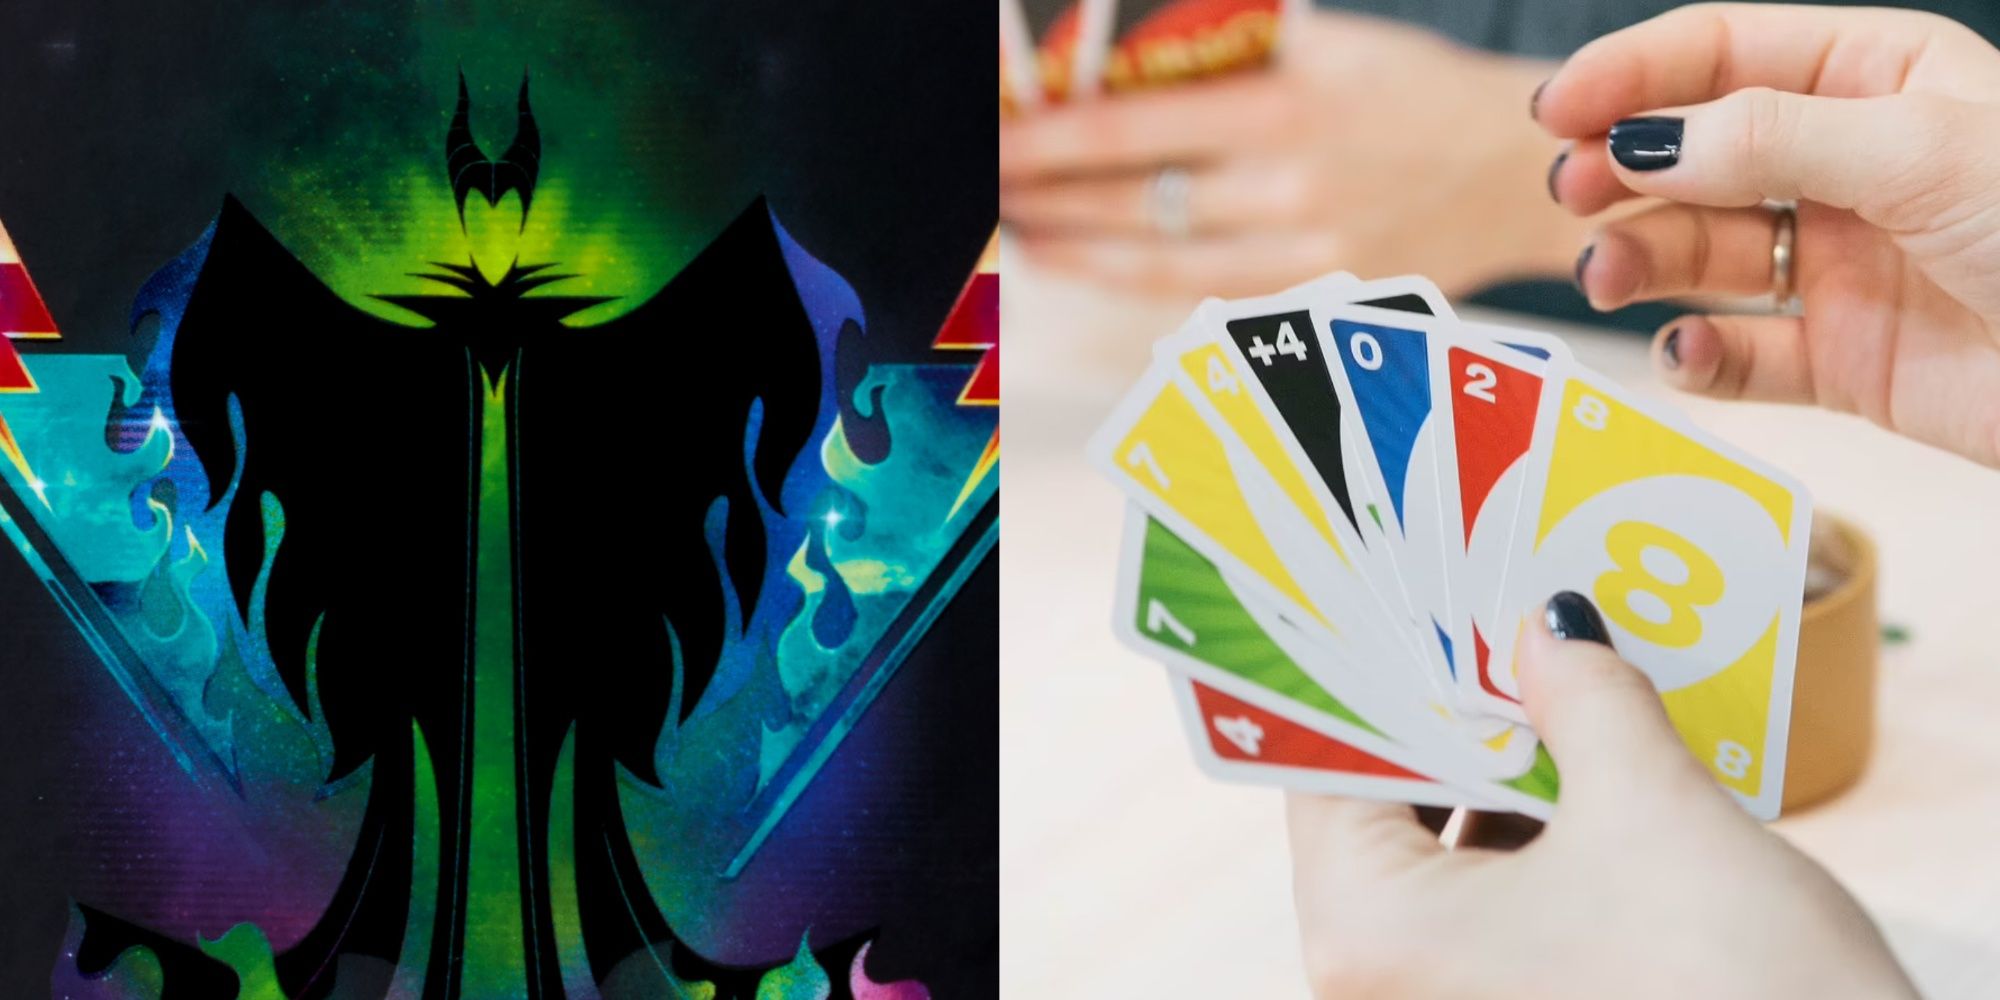 disney villains uno fandom maleficent art, and someone holding a hand of uno cards